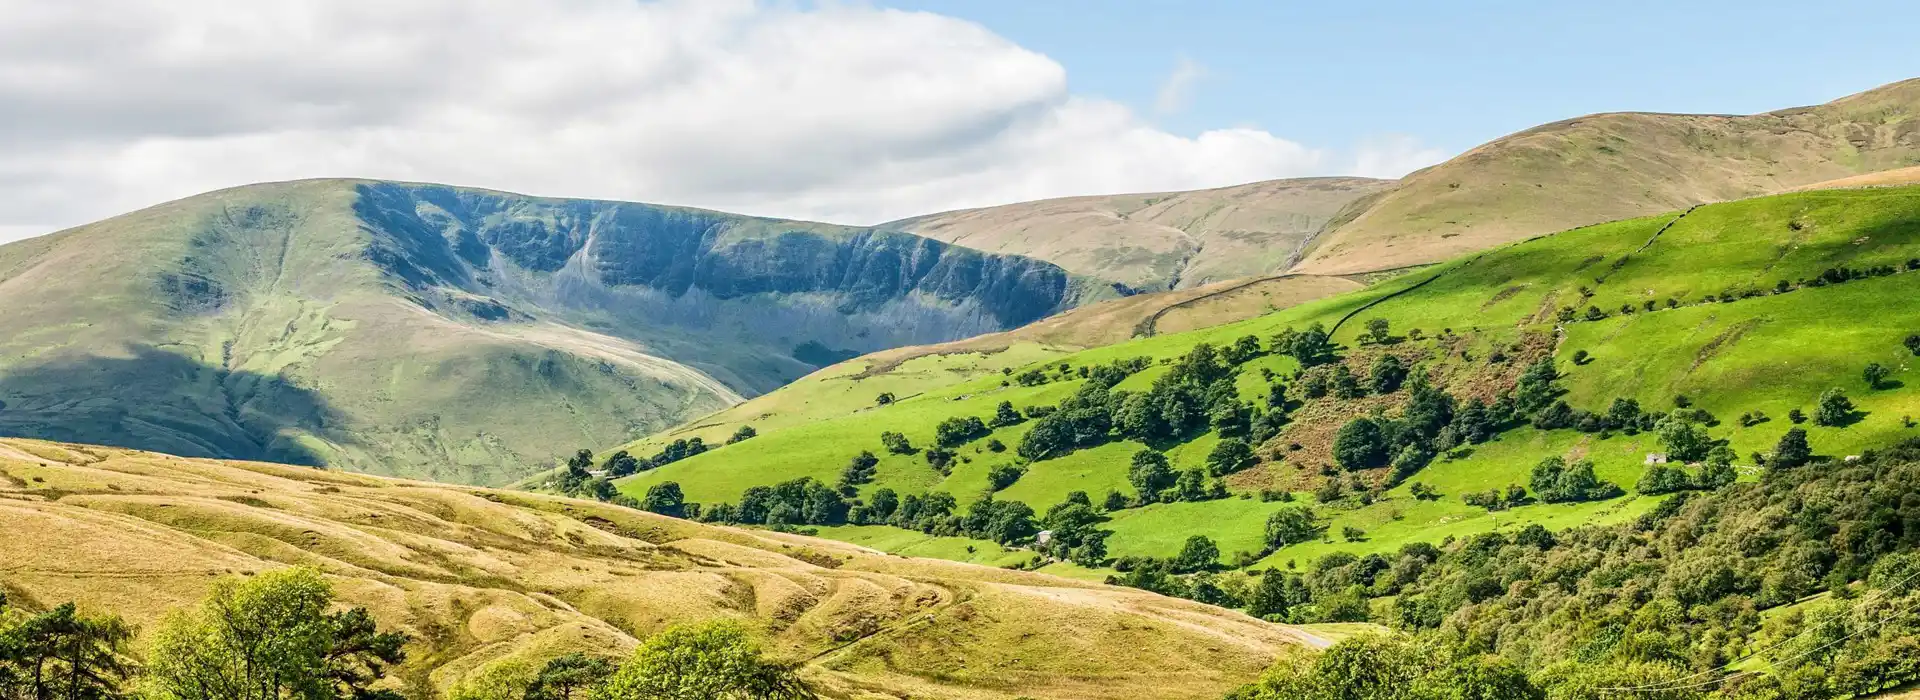 Campsites in the Yorkshire Dales